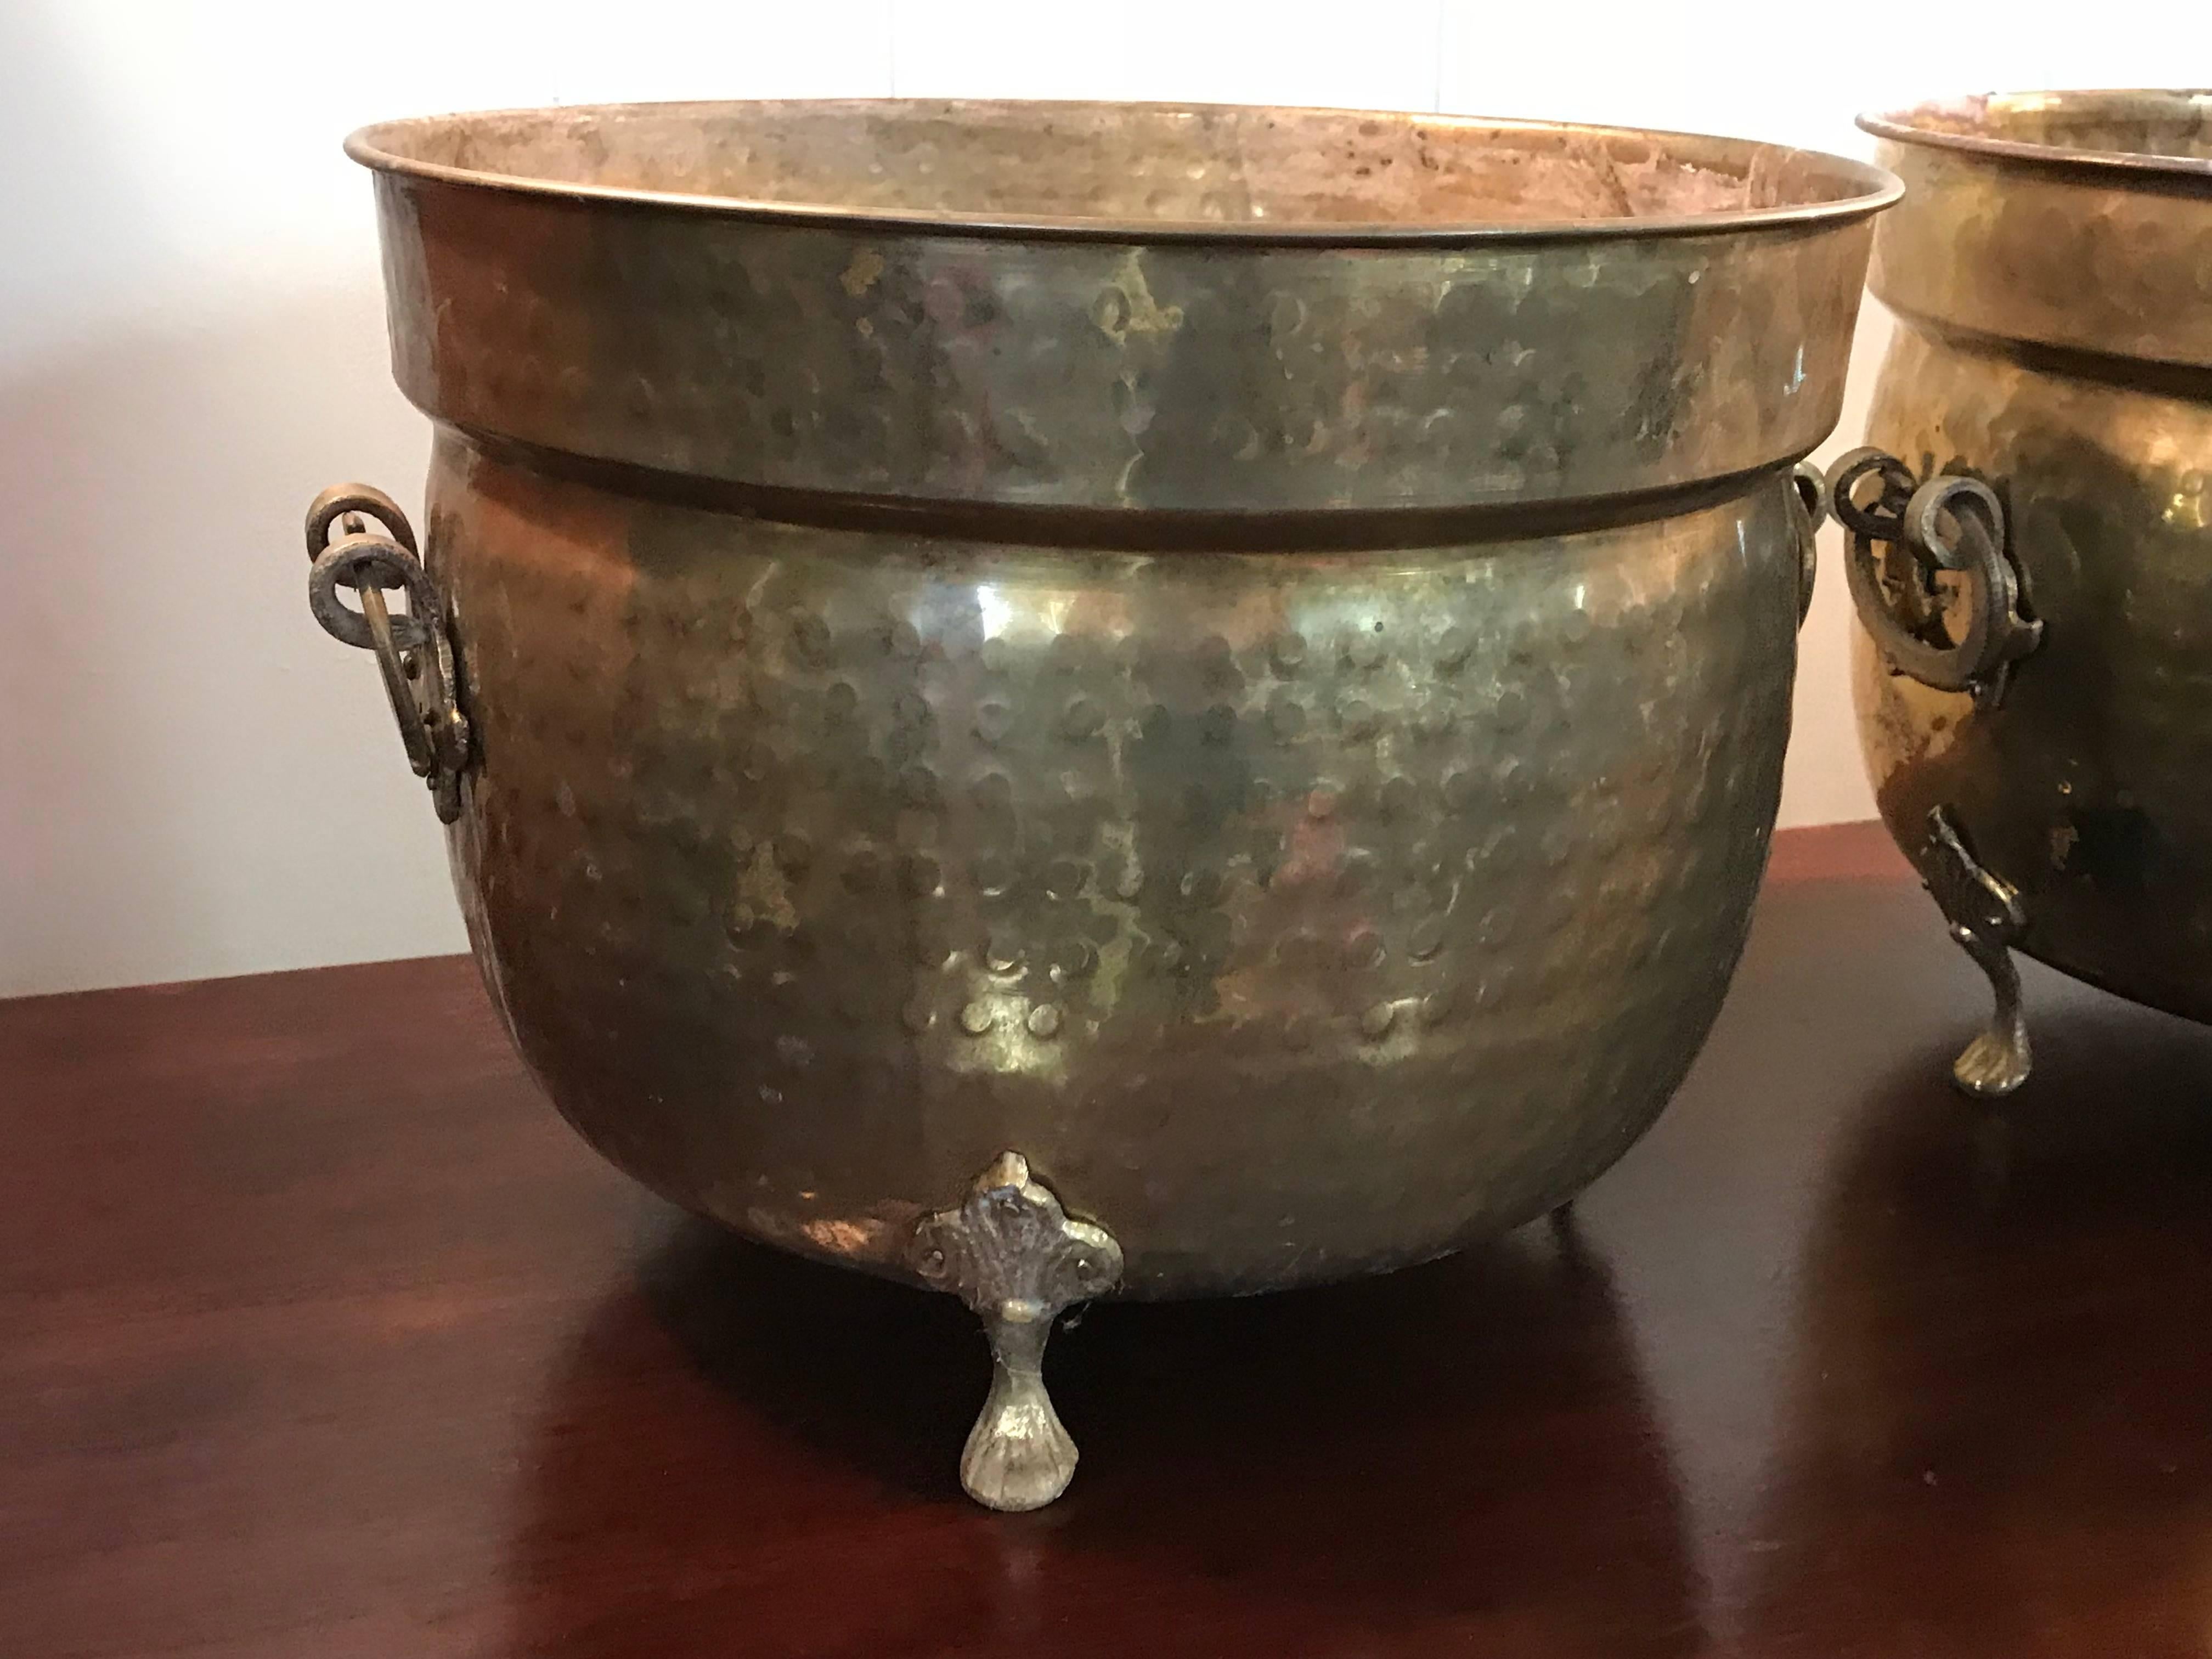 Offered is a fabulous, pair of large, 1960s Italian hammered brass cachepot planters. Each has three clawfeet and two handles.